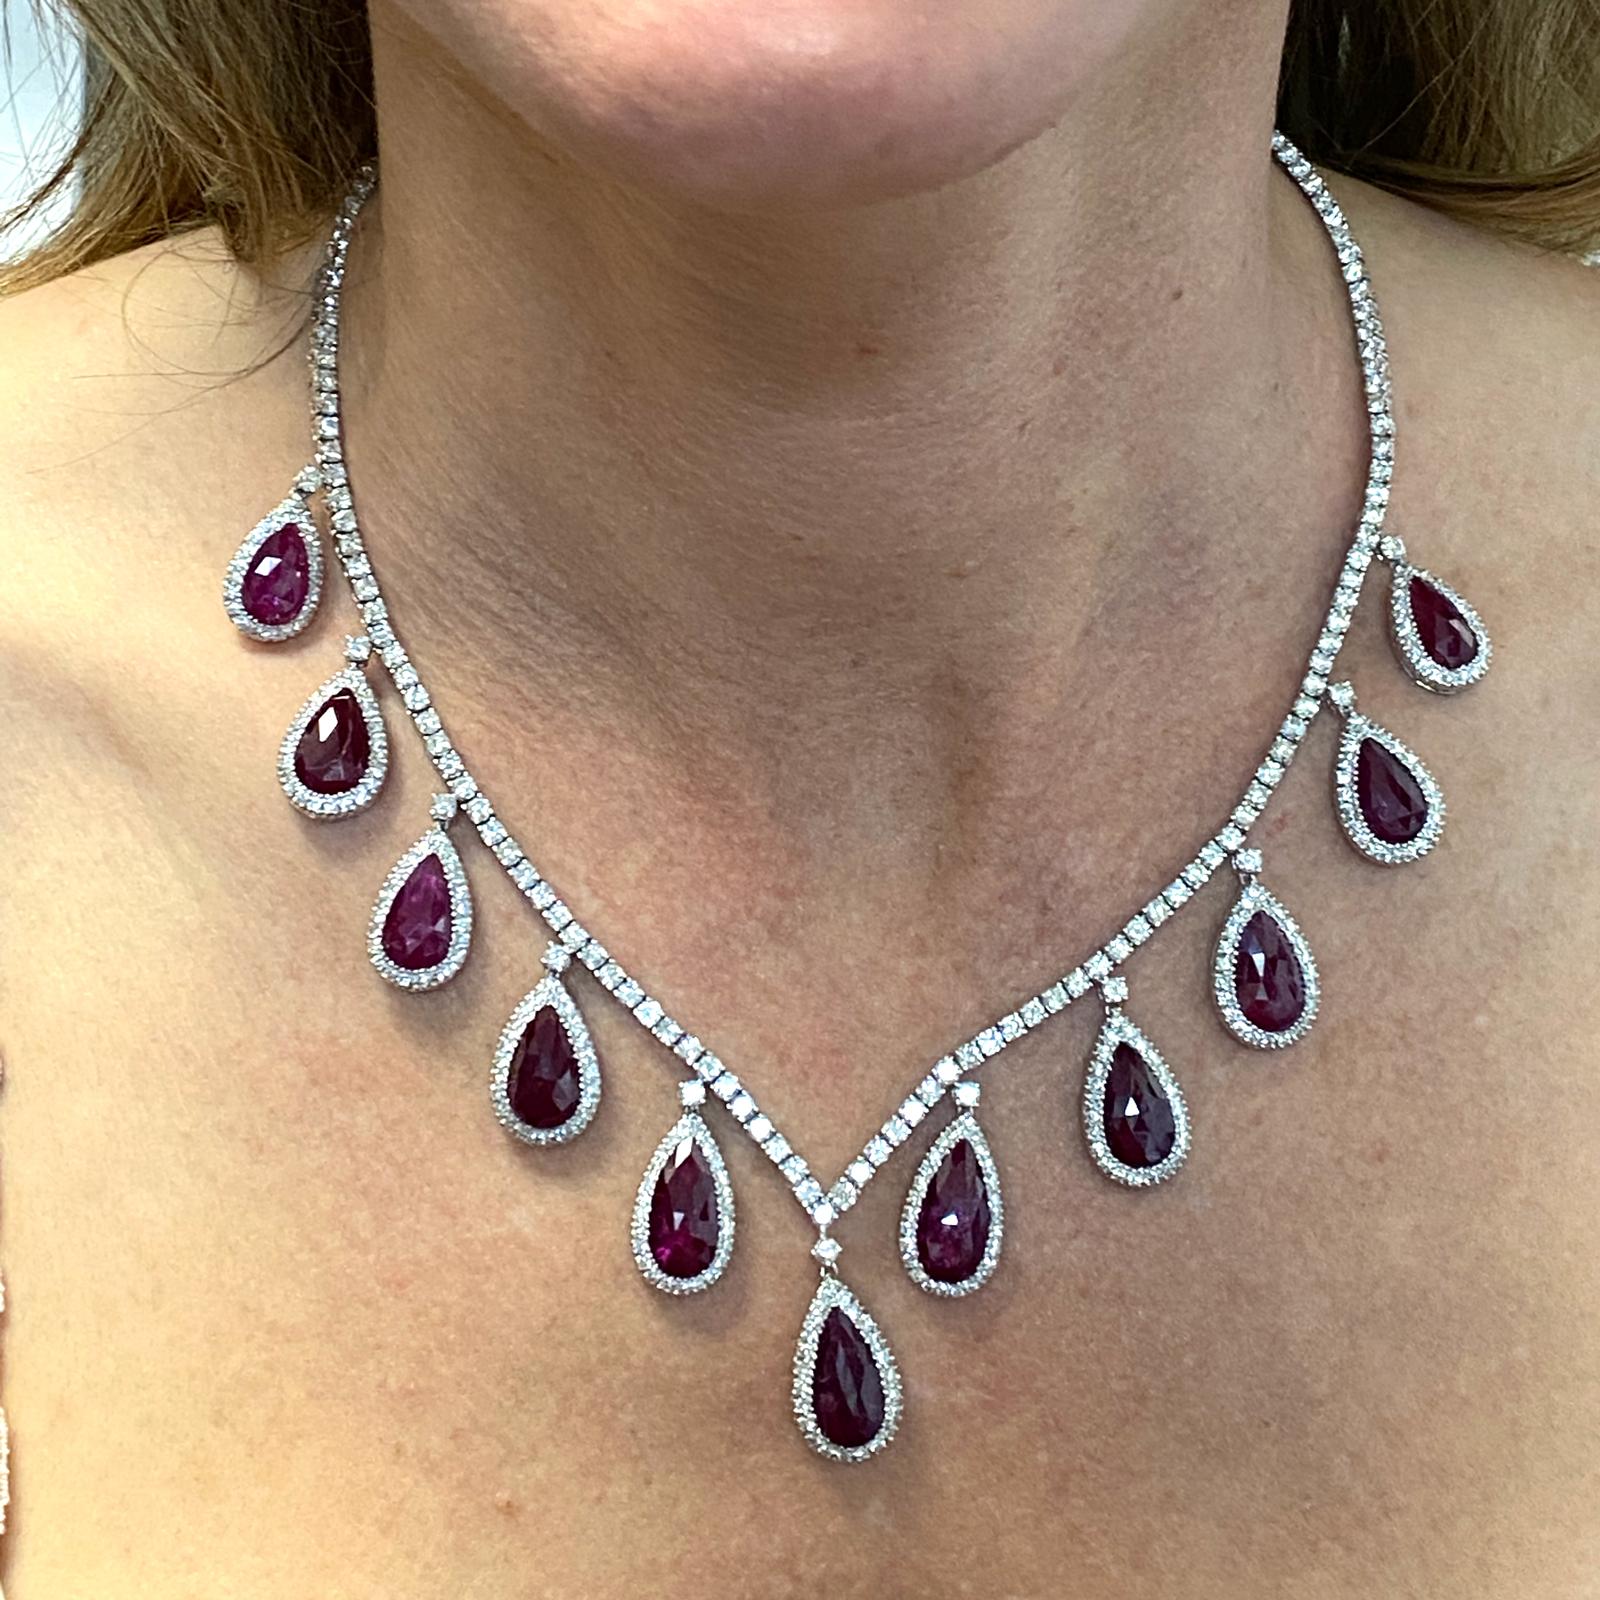 Beautiful diamond and natural ruby drop necklace fashioned in 18 karat white gold. The 11 pear shape natural rubies weigh approximately 11.00 carat total weight, and are heat treated. The round brilliant cut diamonds weigh approximately 12.00 carat